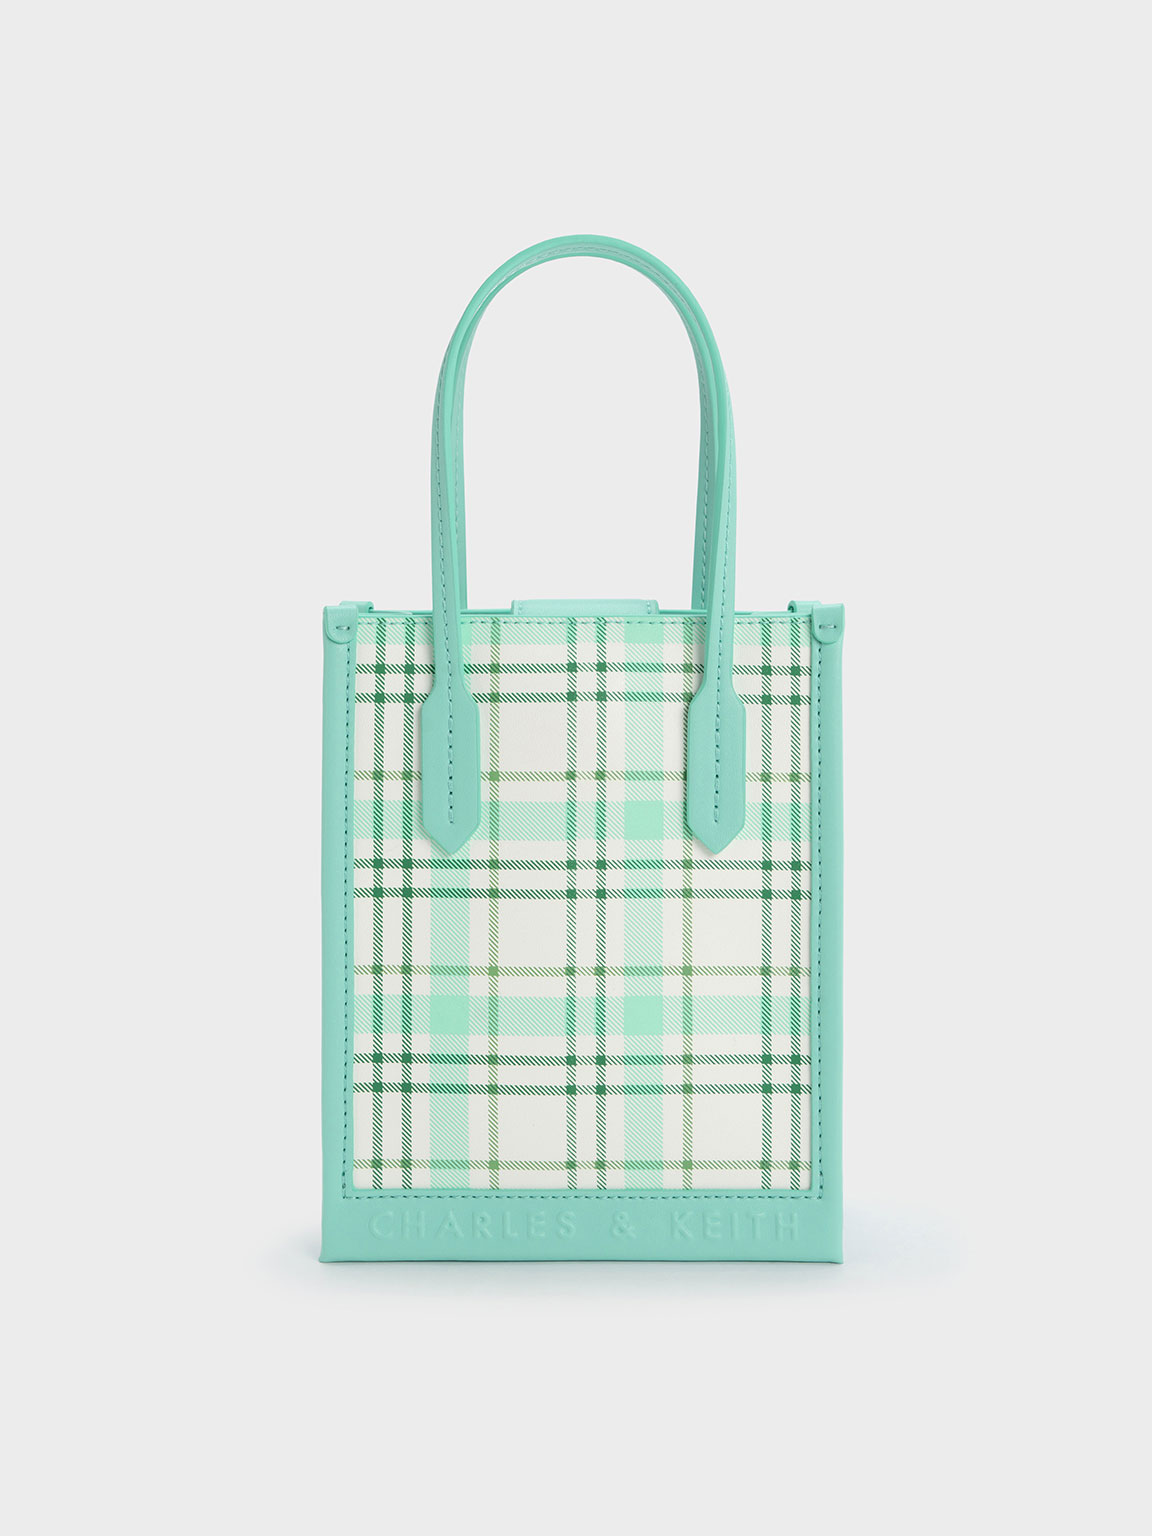 Multicoloured Oona Tote Bag - CHARLES & KEITH TH